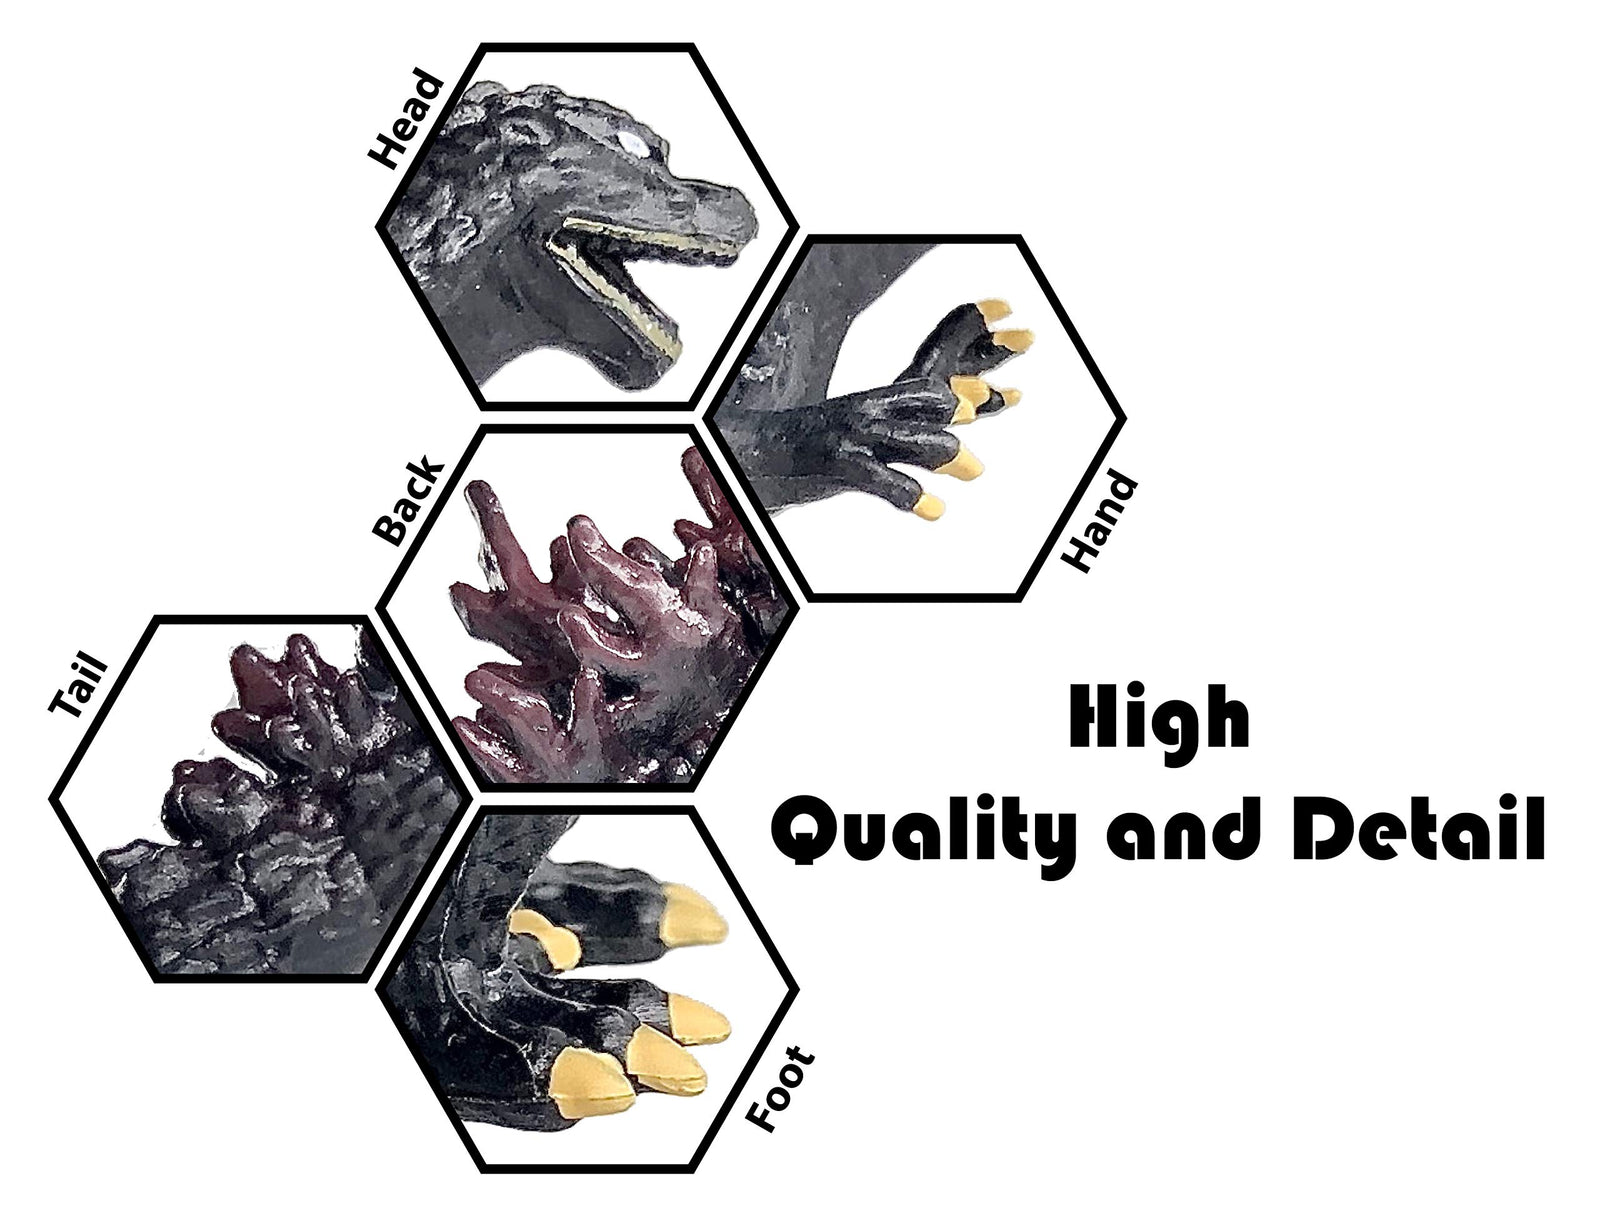 EZFun Set of 10 Godzilla Toys with Carry Bag, Movable Joint Action Figures 2019, King of the Monsters Mini Dinosaur Mothra Imago Burning Heisei Mecha Ghidorah Playsets Kids Birthday Cake Toppers Pack